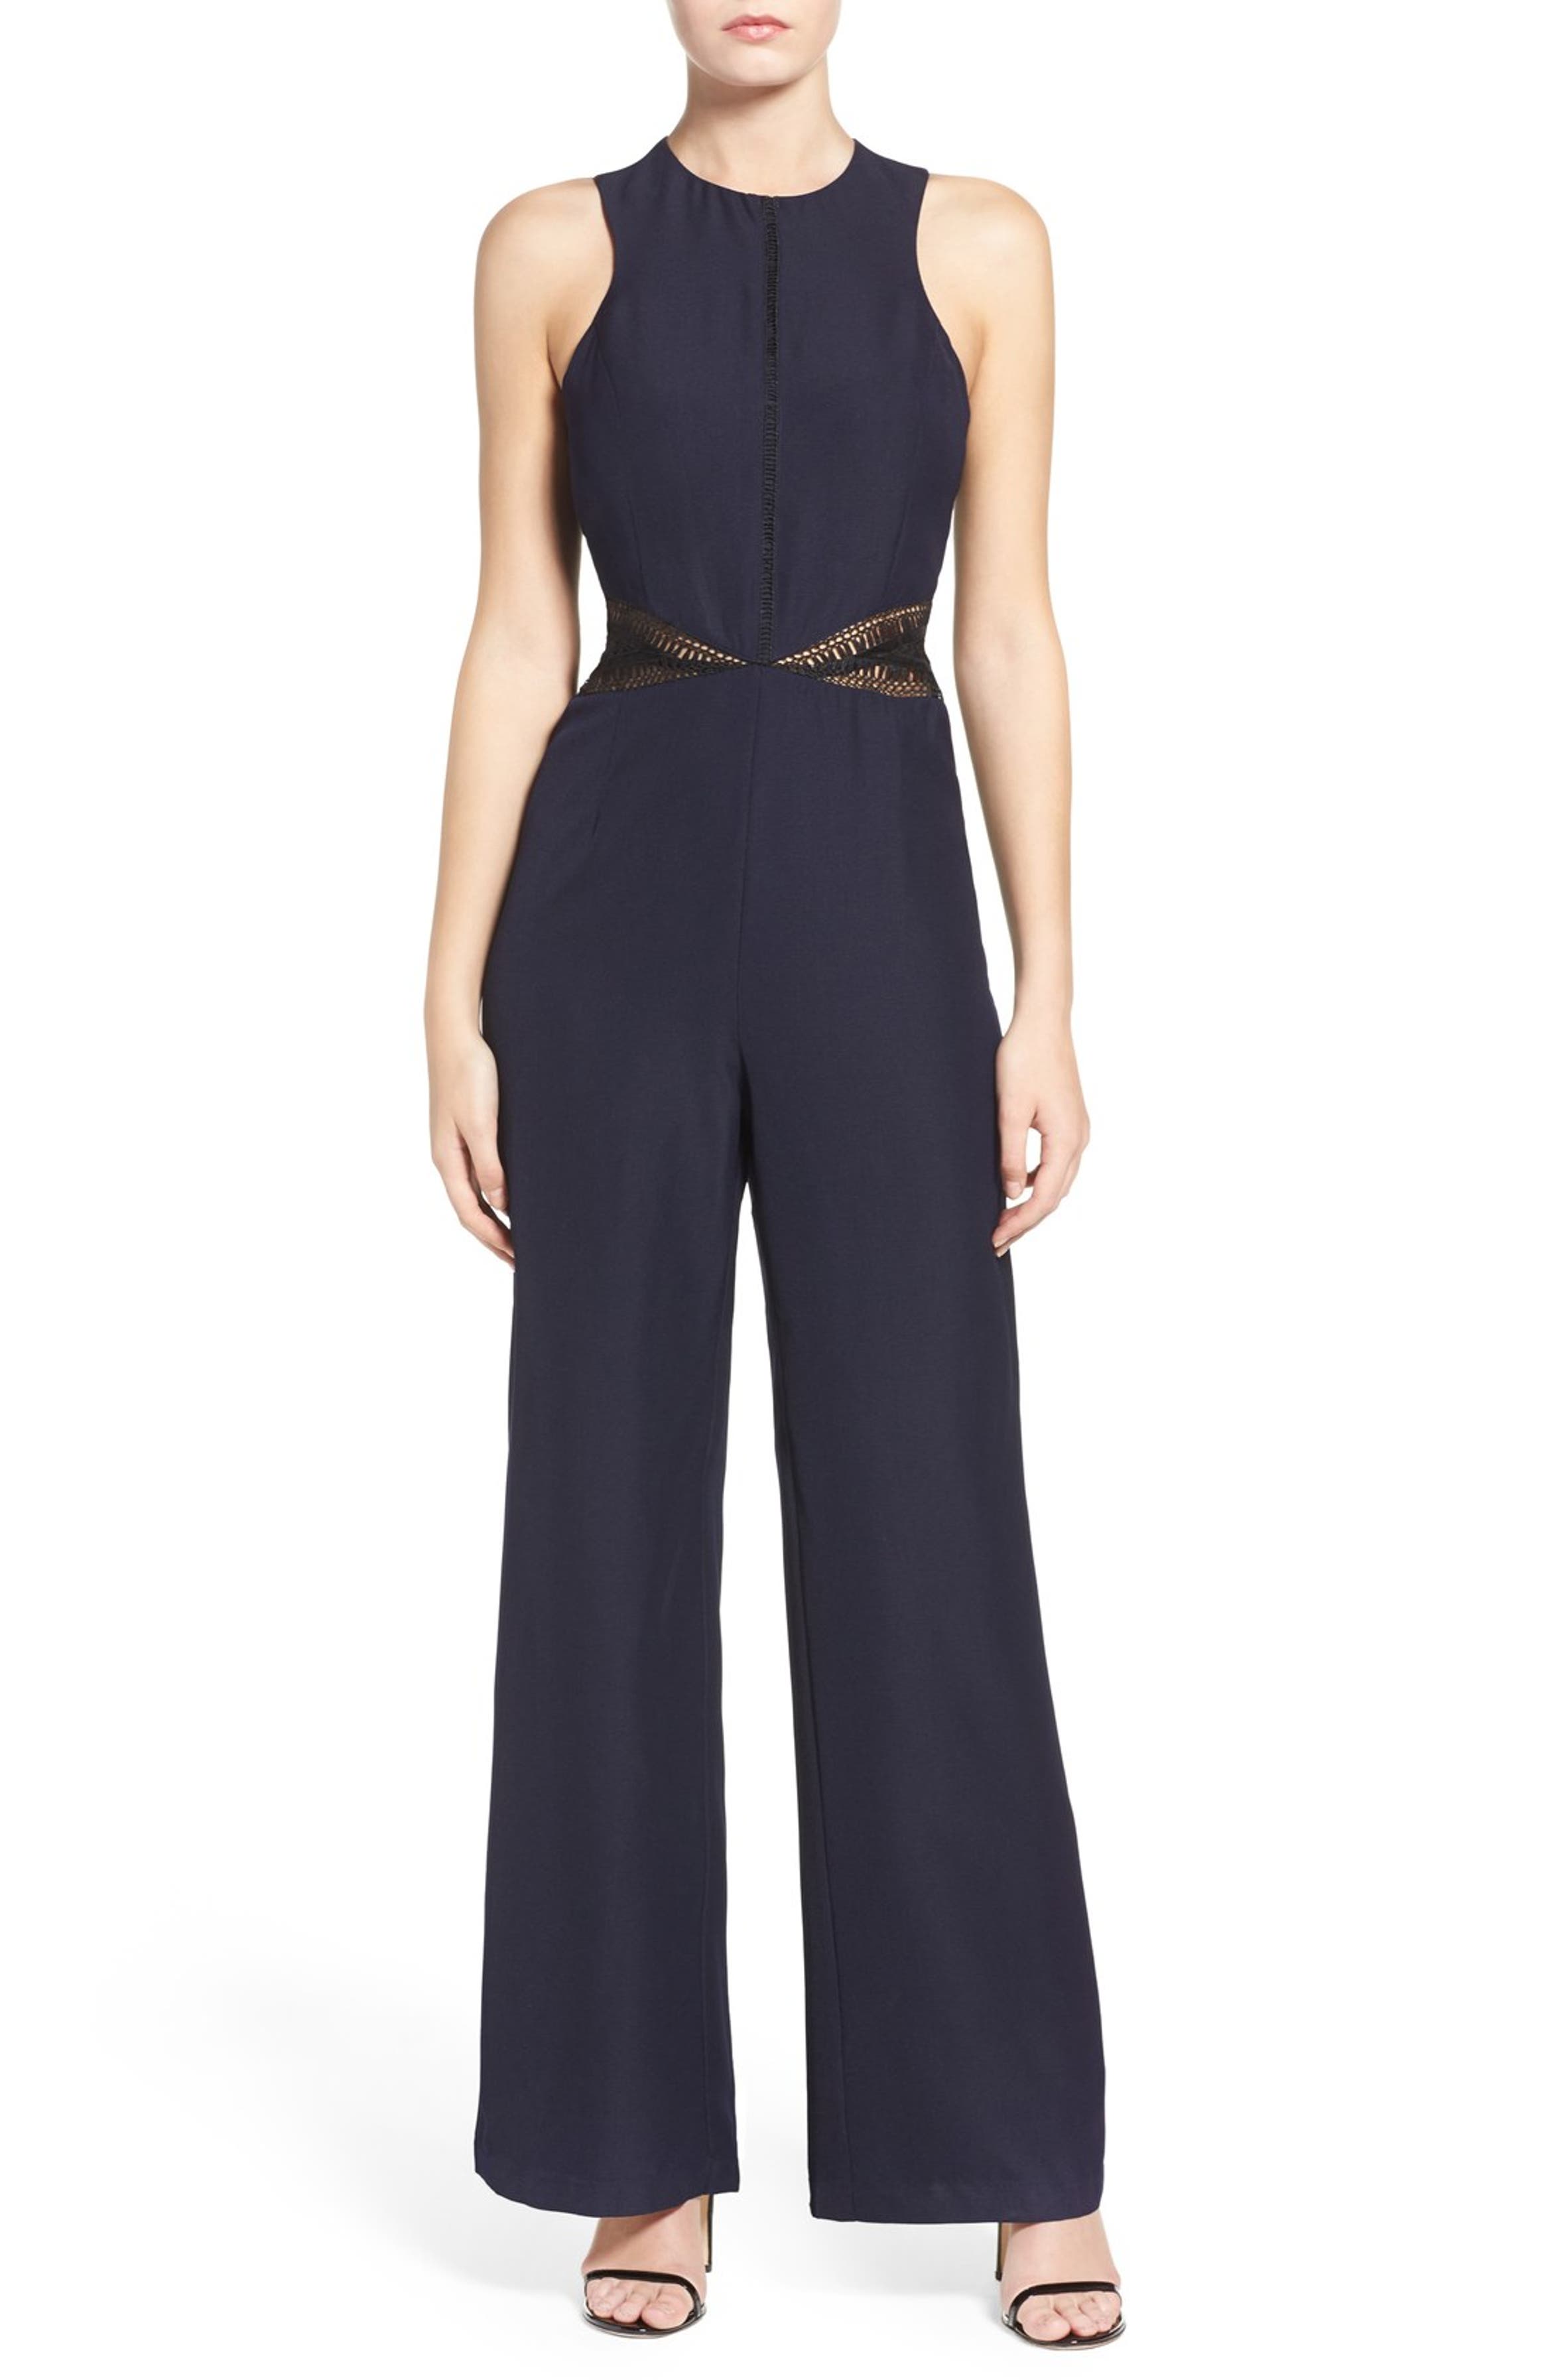 Adelyn Rae Lace Inset Jumpsuit | Nordstrom